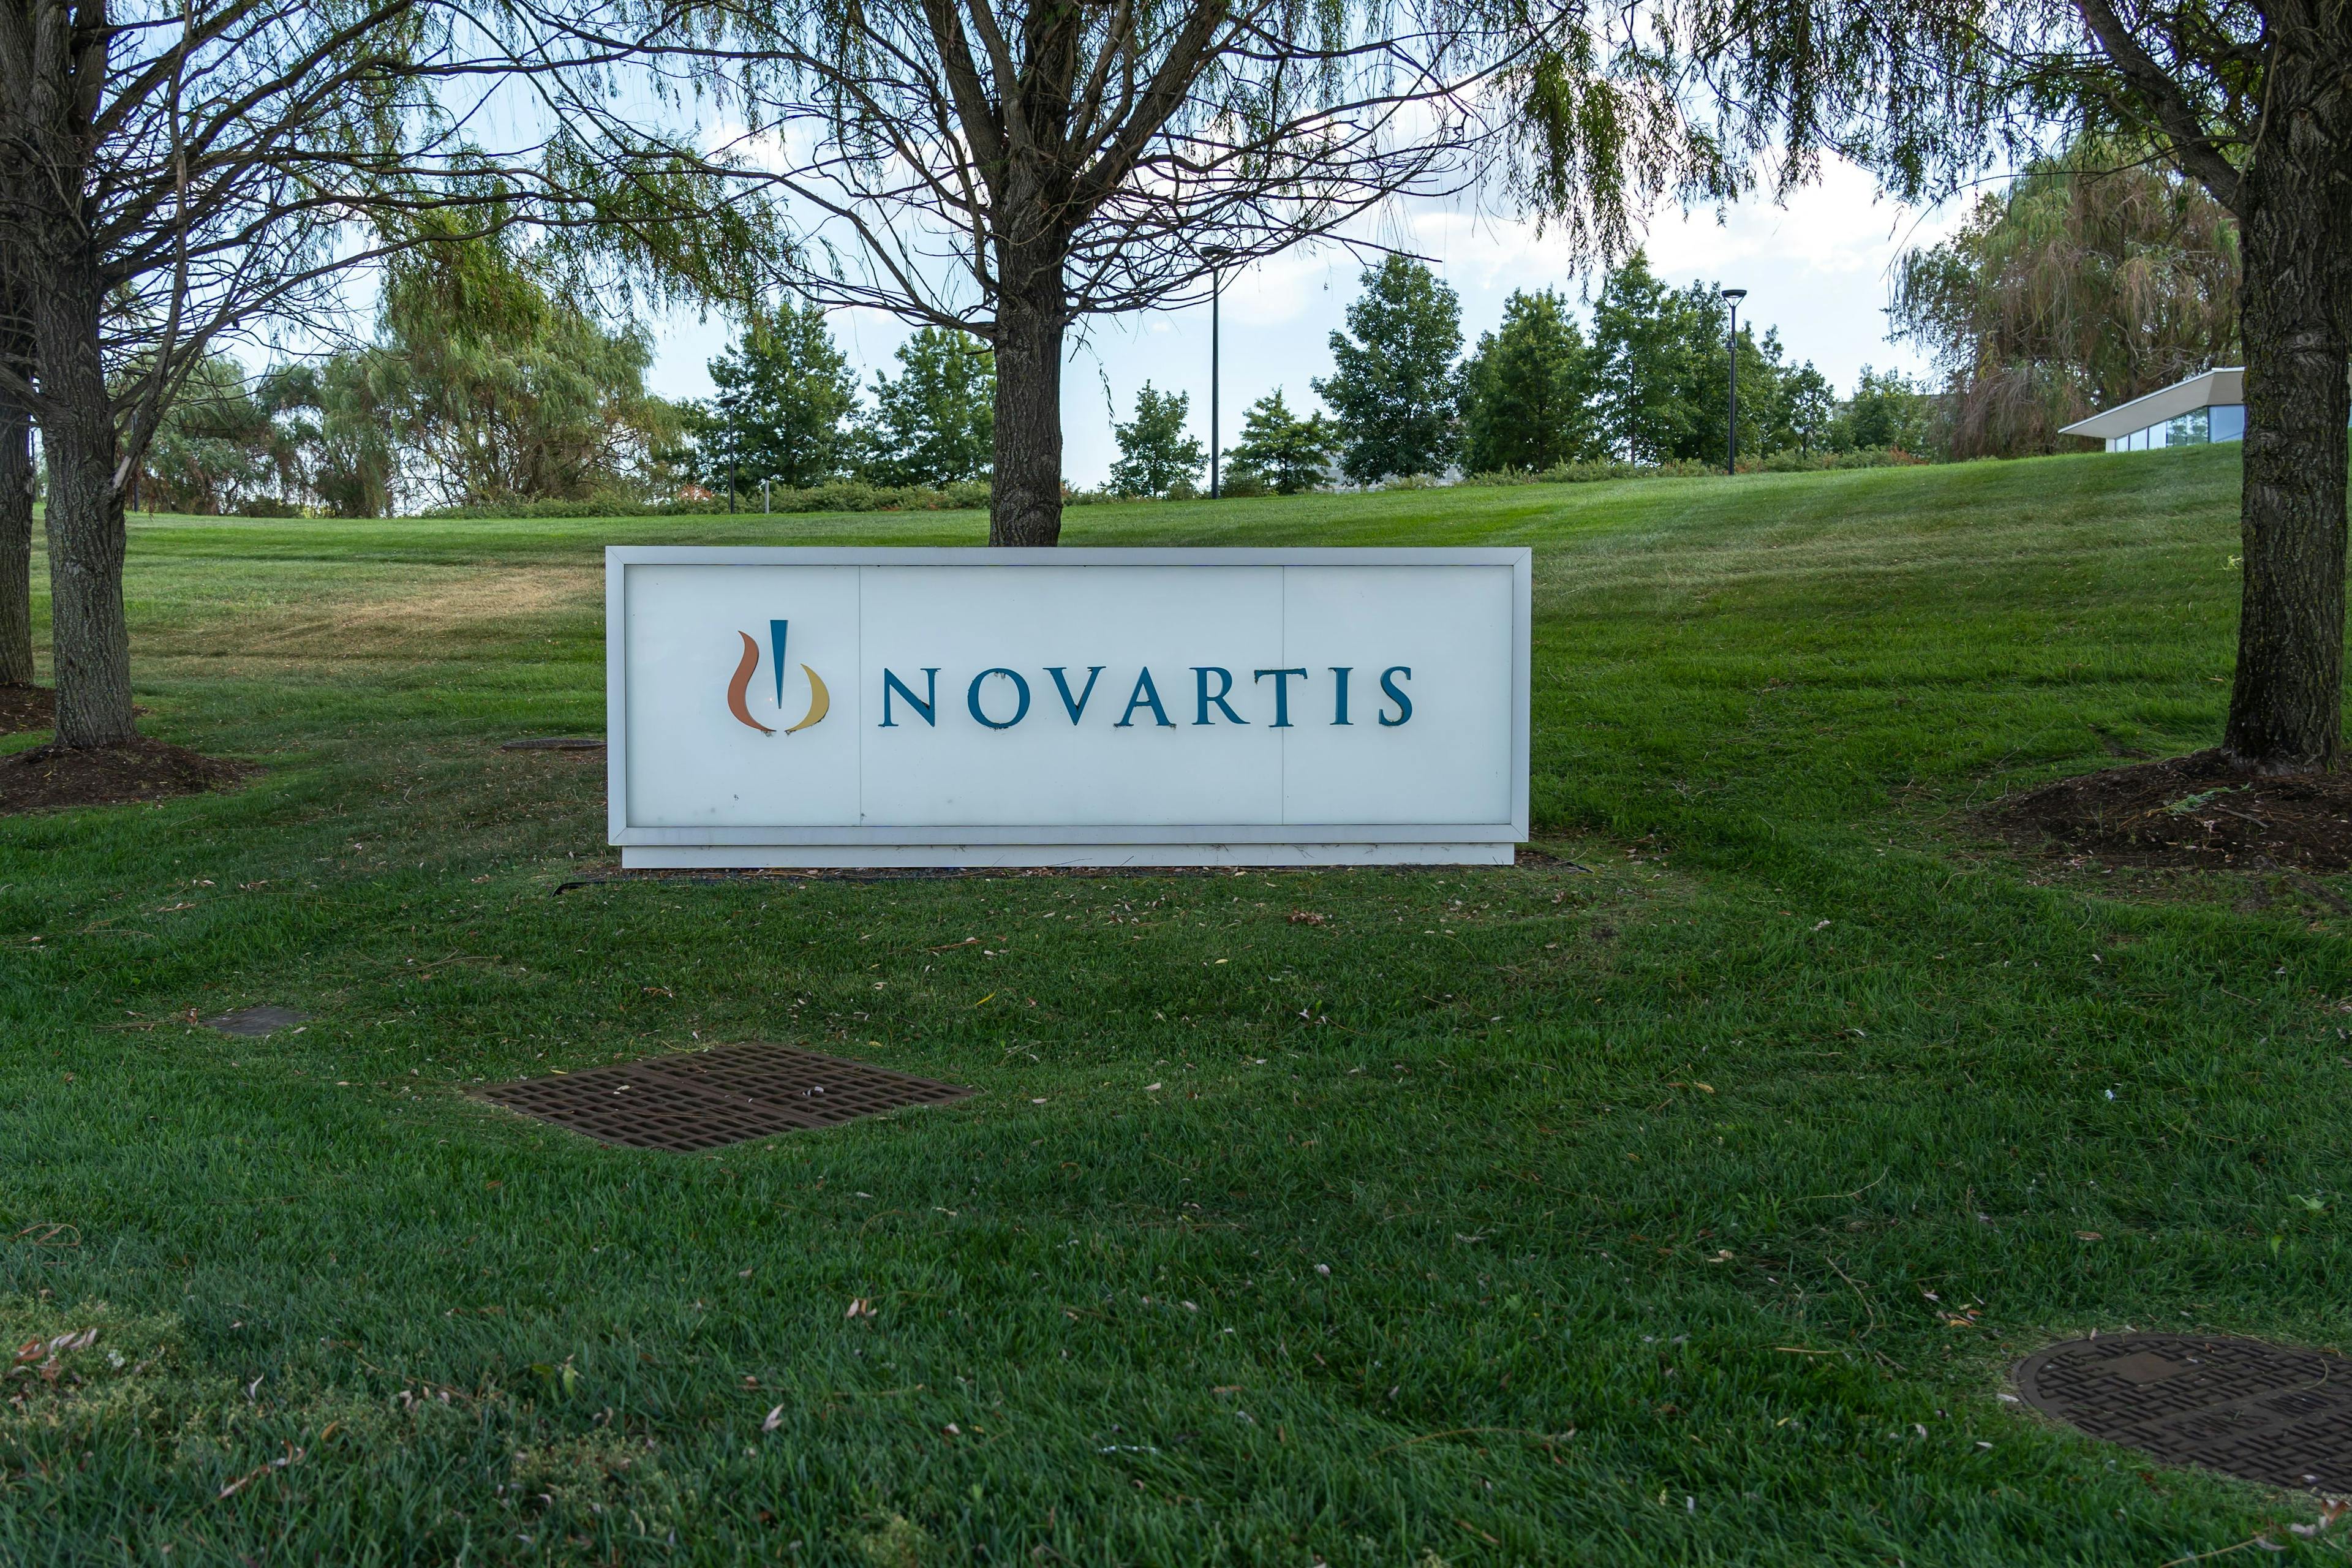 East Hanover, NJ, USA - August 16, 2022: Novartis sign at its headquarters in East Hanover, NJ, USA. Novartis AG is a Swiss-American multinational pharmaceutical corporation. | Image credit ©  JHVEPhoto